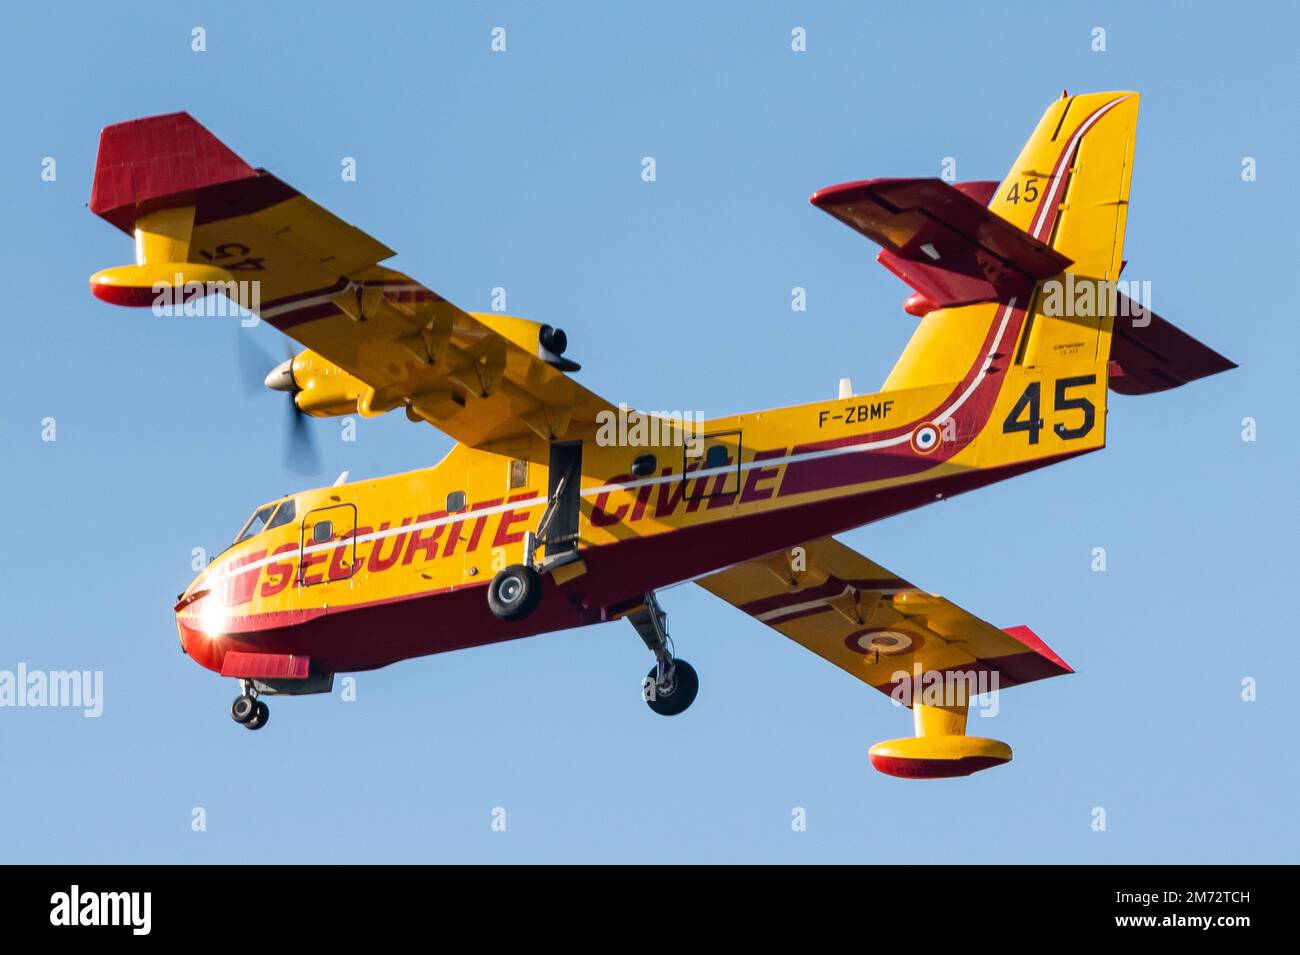 A Canadair CL-415 amphibious aircraft for aerial firefighting of the French Sécurité Civile to combat wildfires. Stock Photo